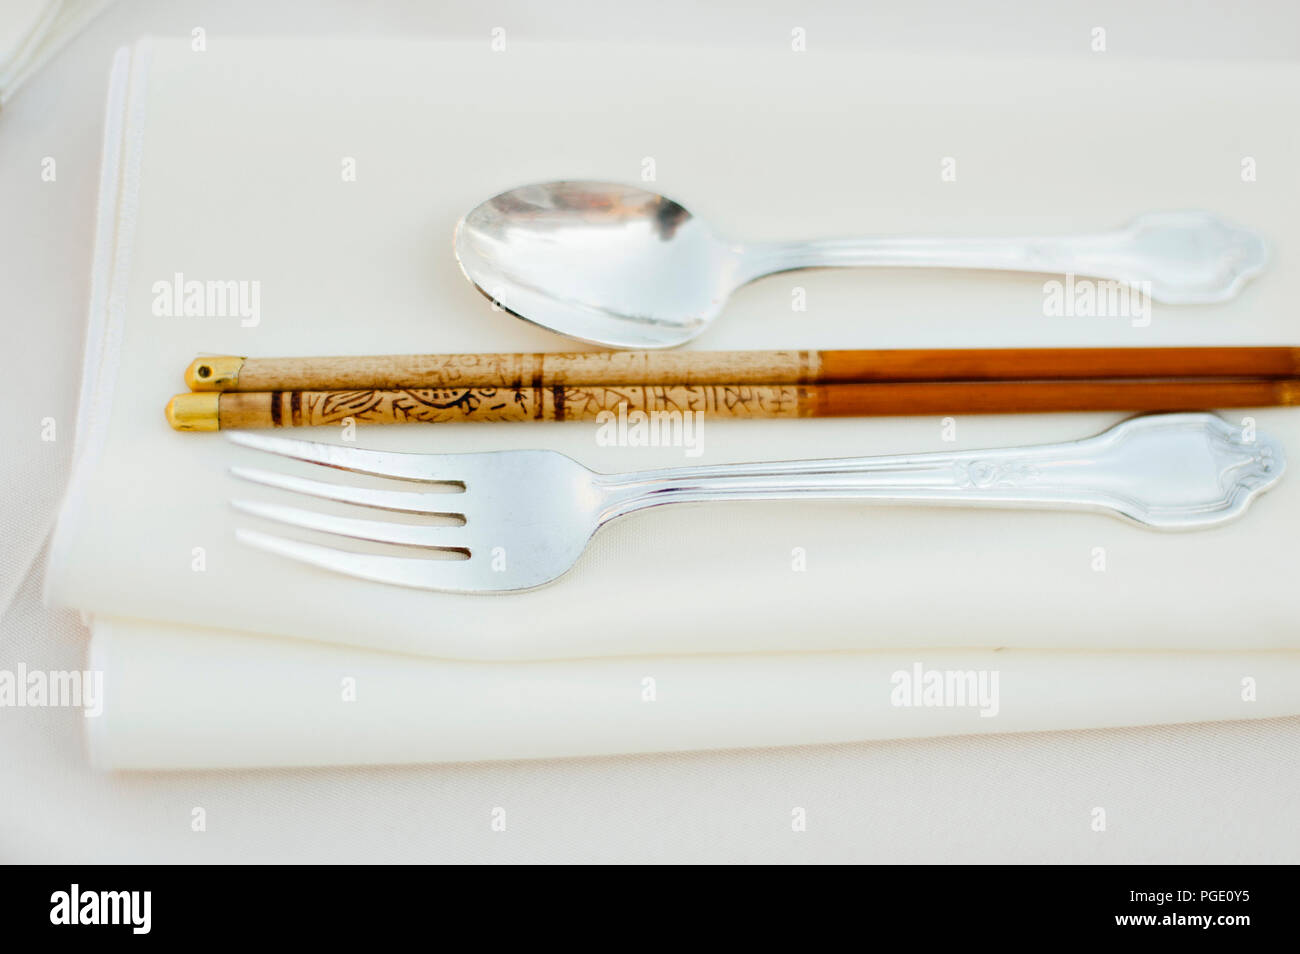 Silver fork and spoon with chopstick on a napkin Stock Photo